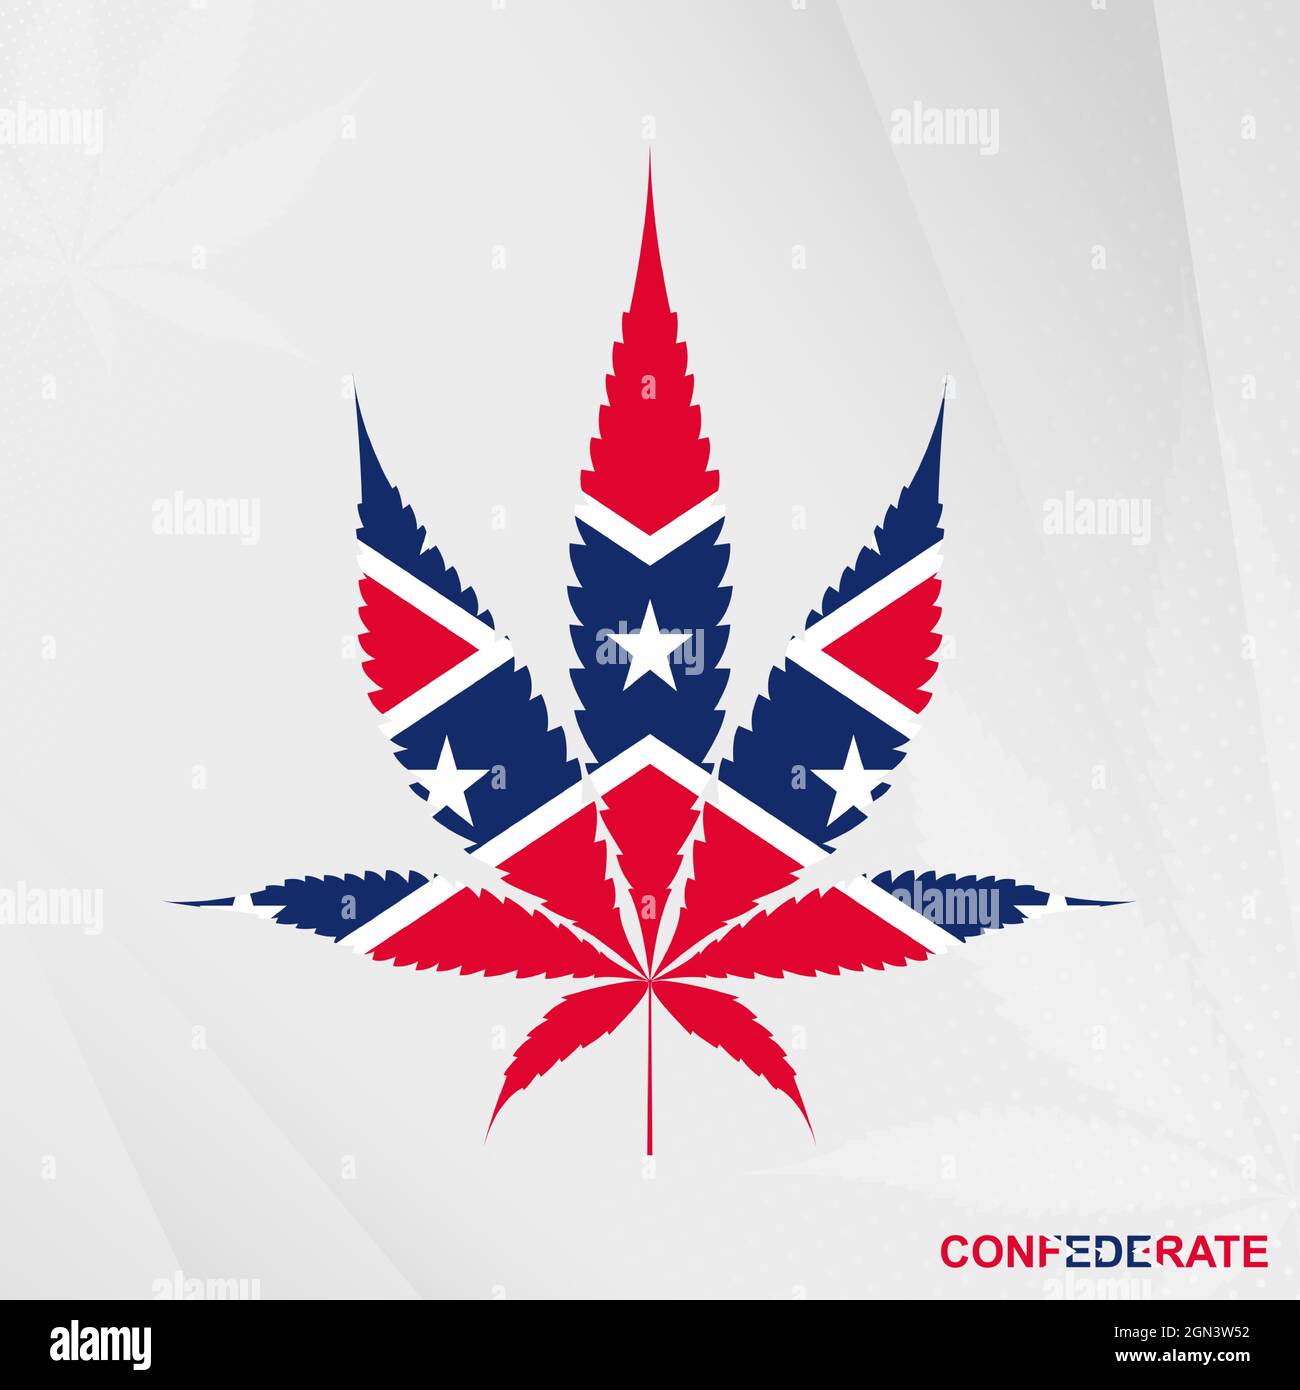 Flag of Confederate in Marijuana leaf shape. The concept of legalization Cannabis in Confederate. Medical cannabis illustration. Stock Vector